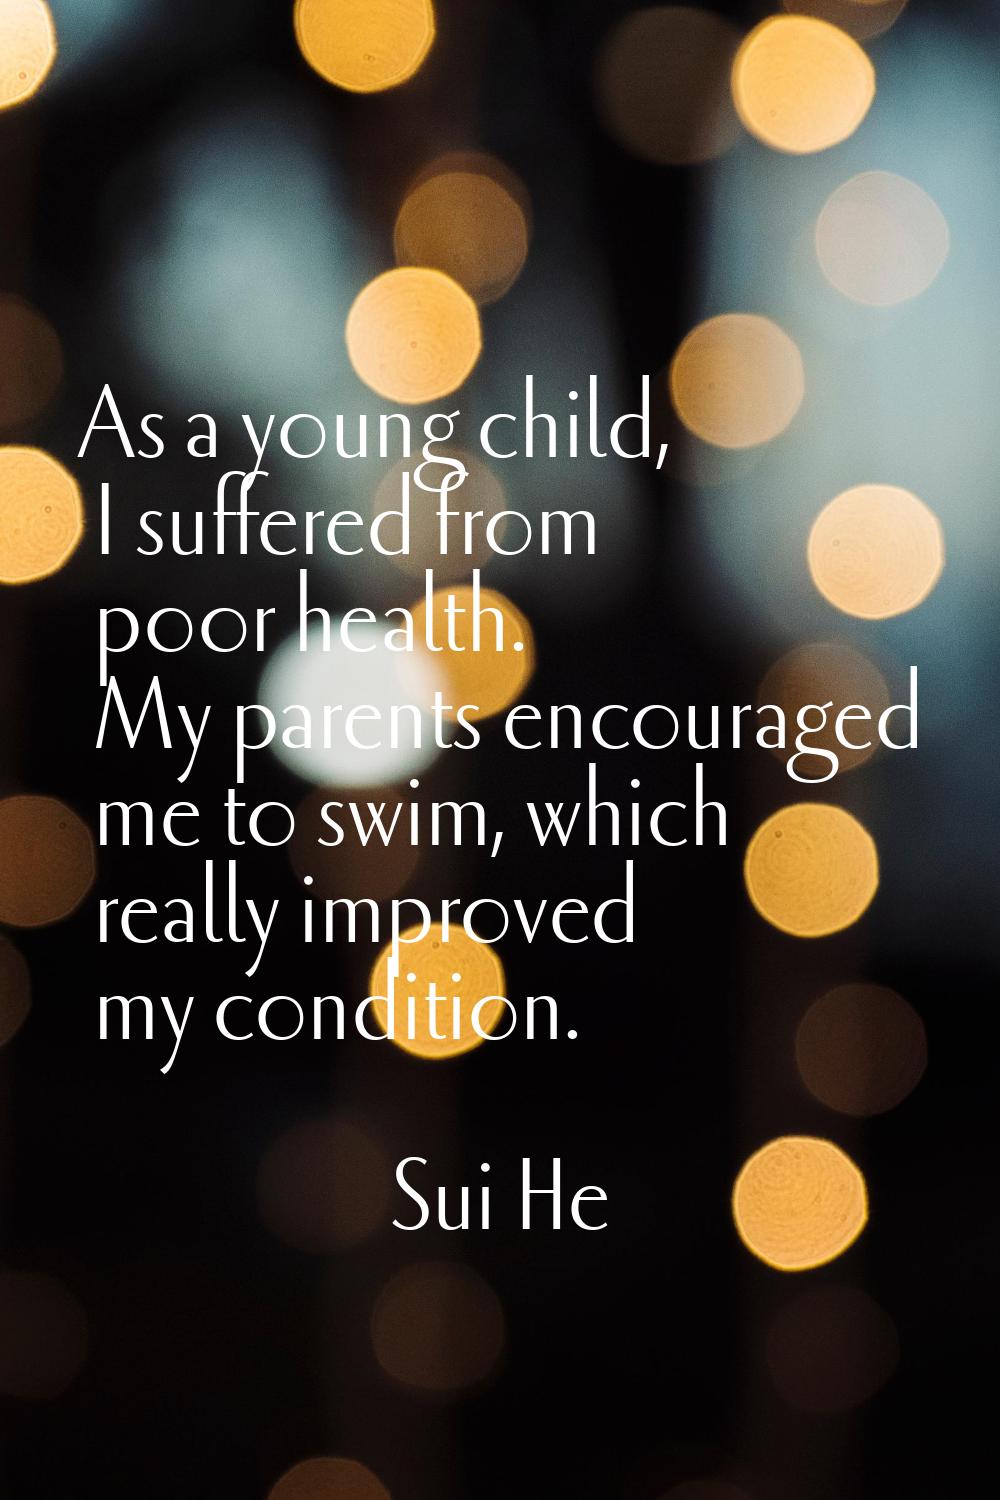 As a young child, I suffered from poor health. My parents encouraged me to swim, which really impro